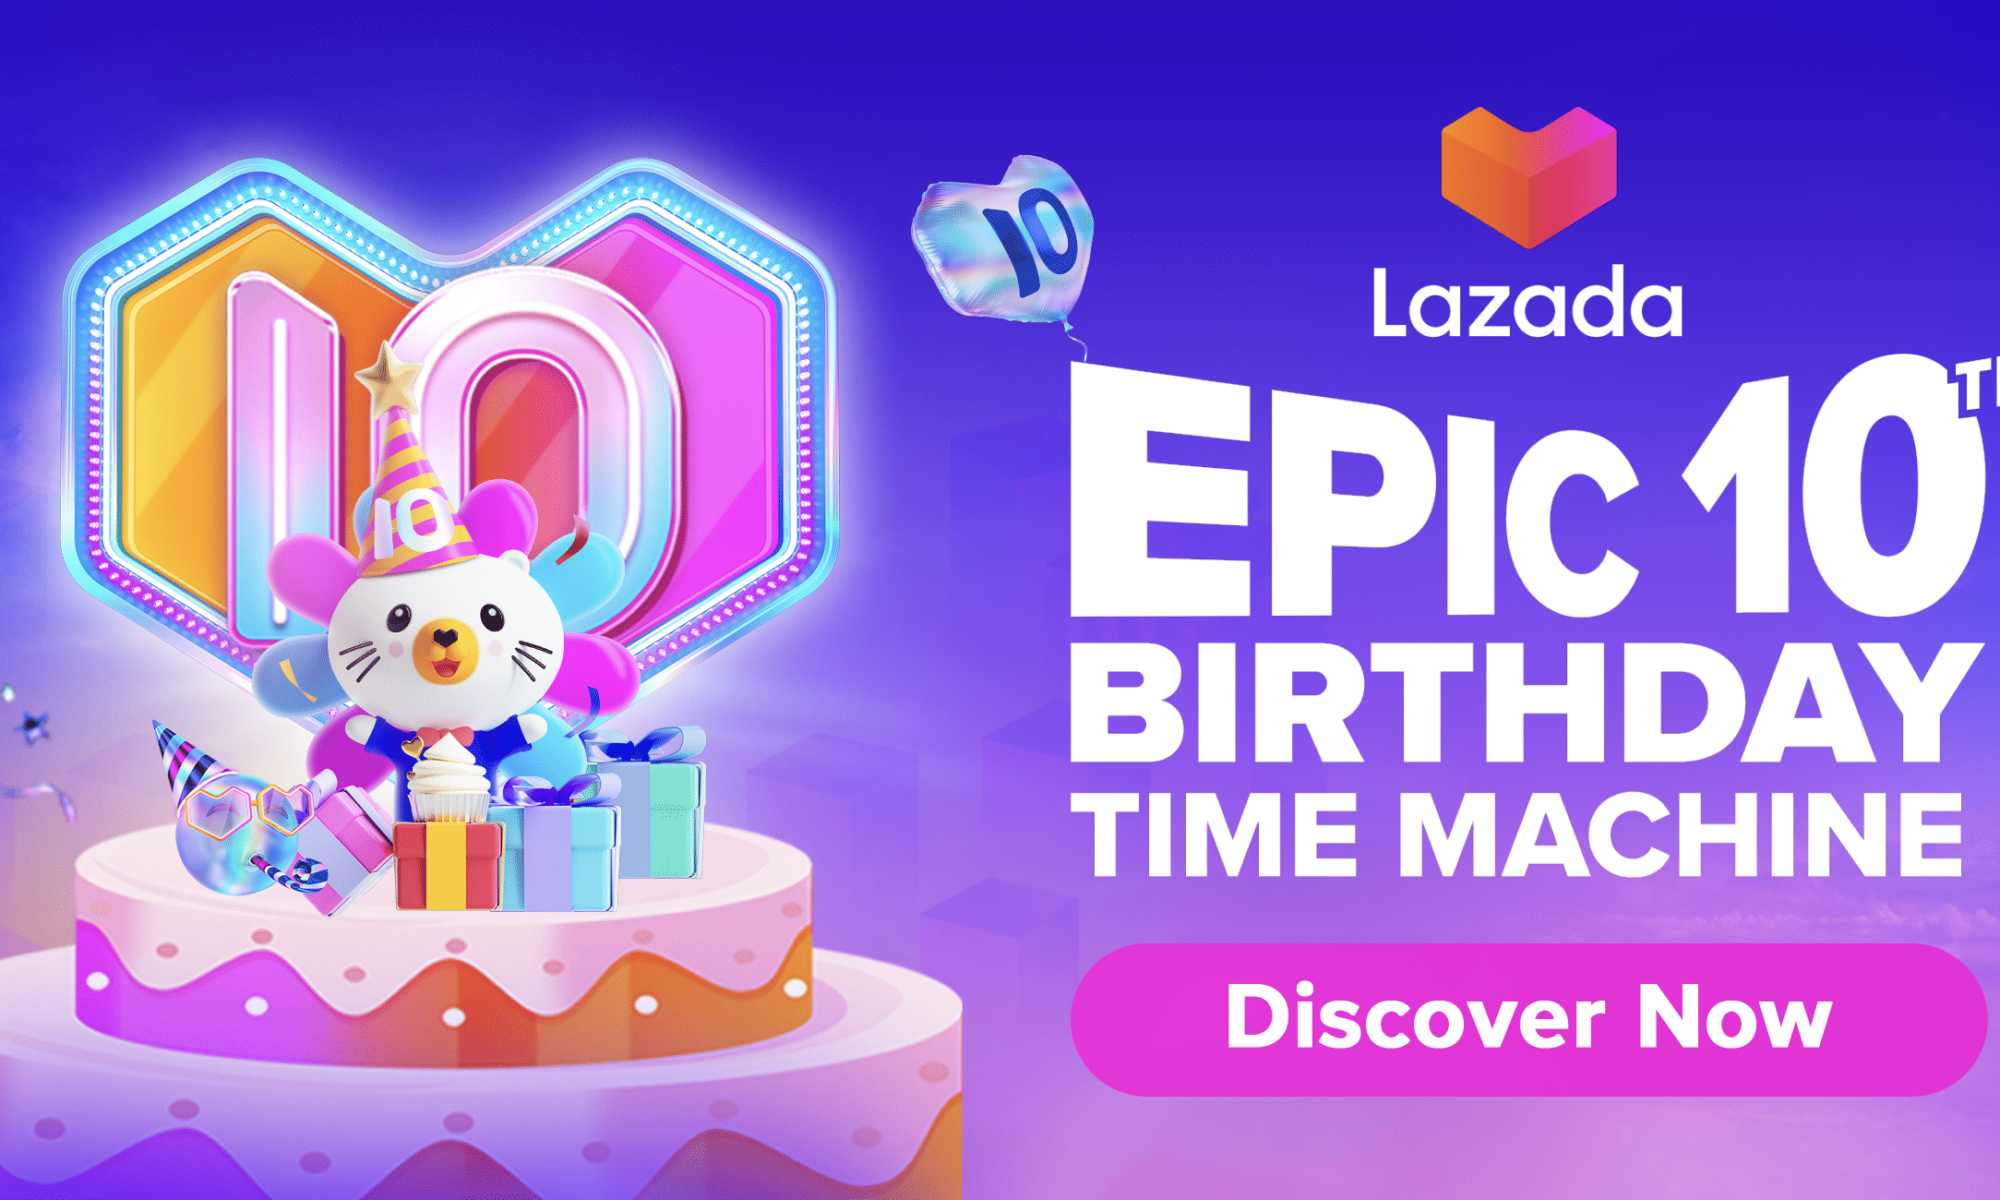 Lazada Celebrates 10 years of pioneering ecommerce in the Philippines